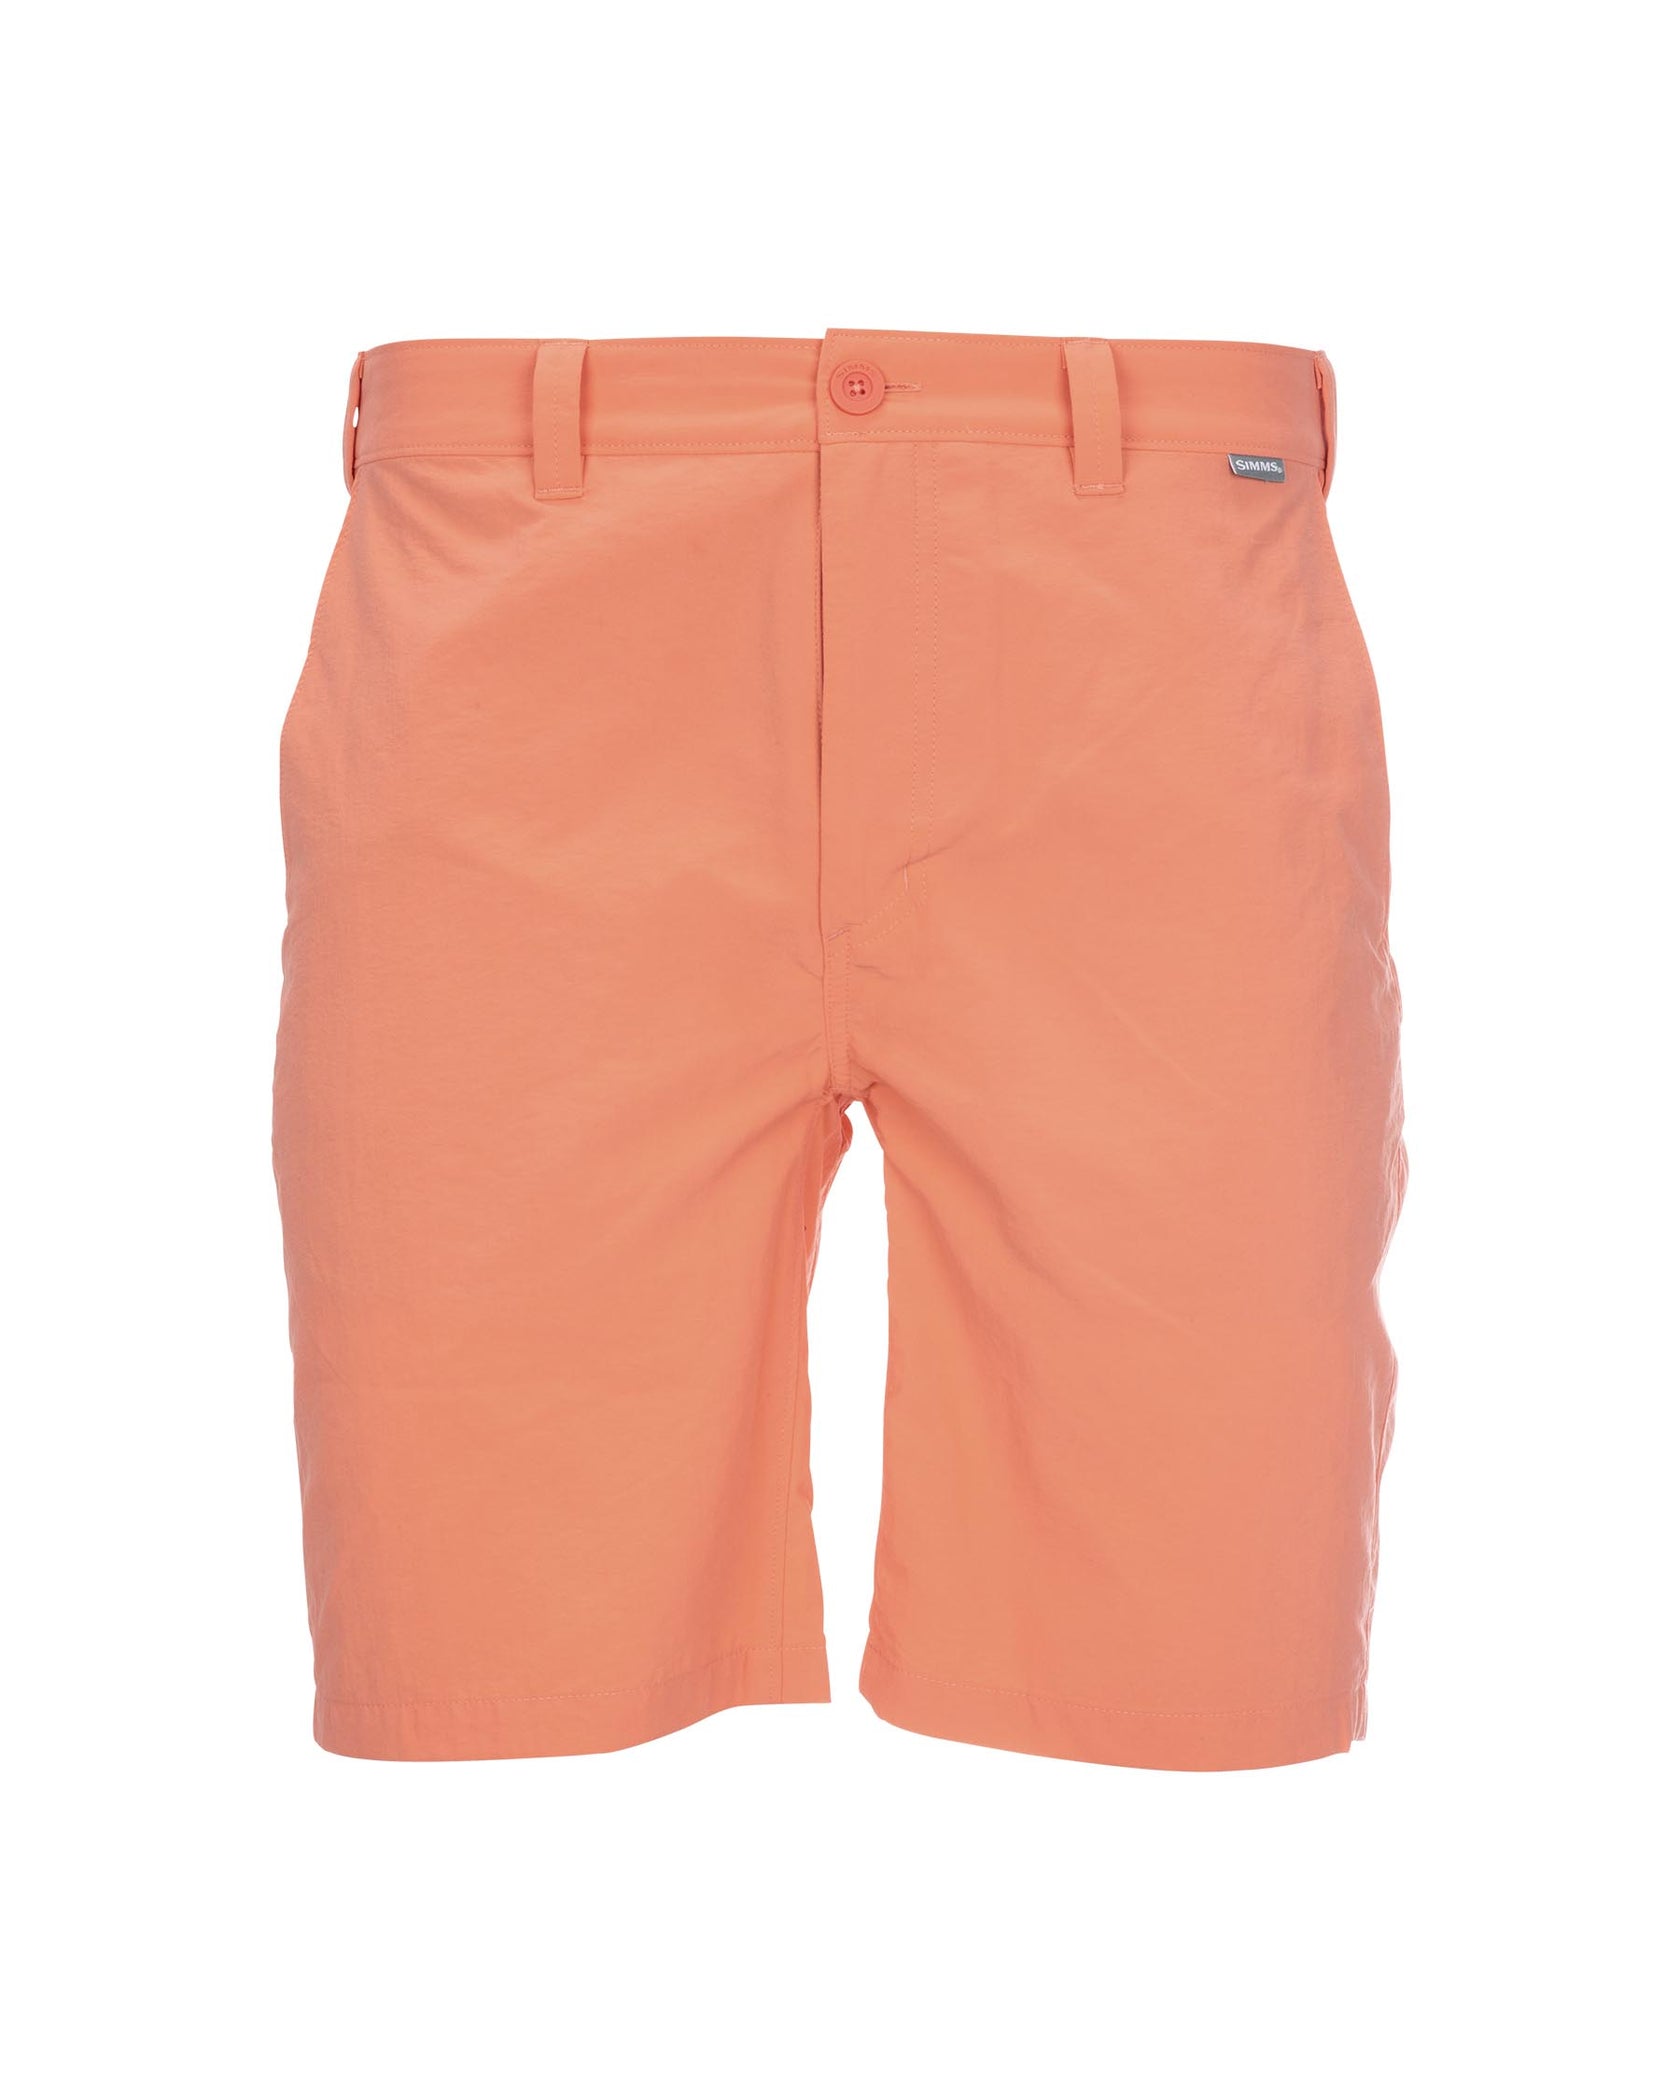 Simms Superlight Short, Coral Reef / 38